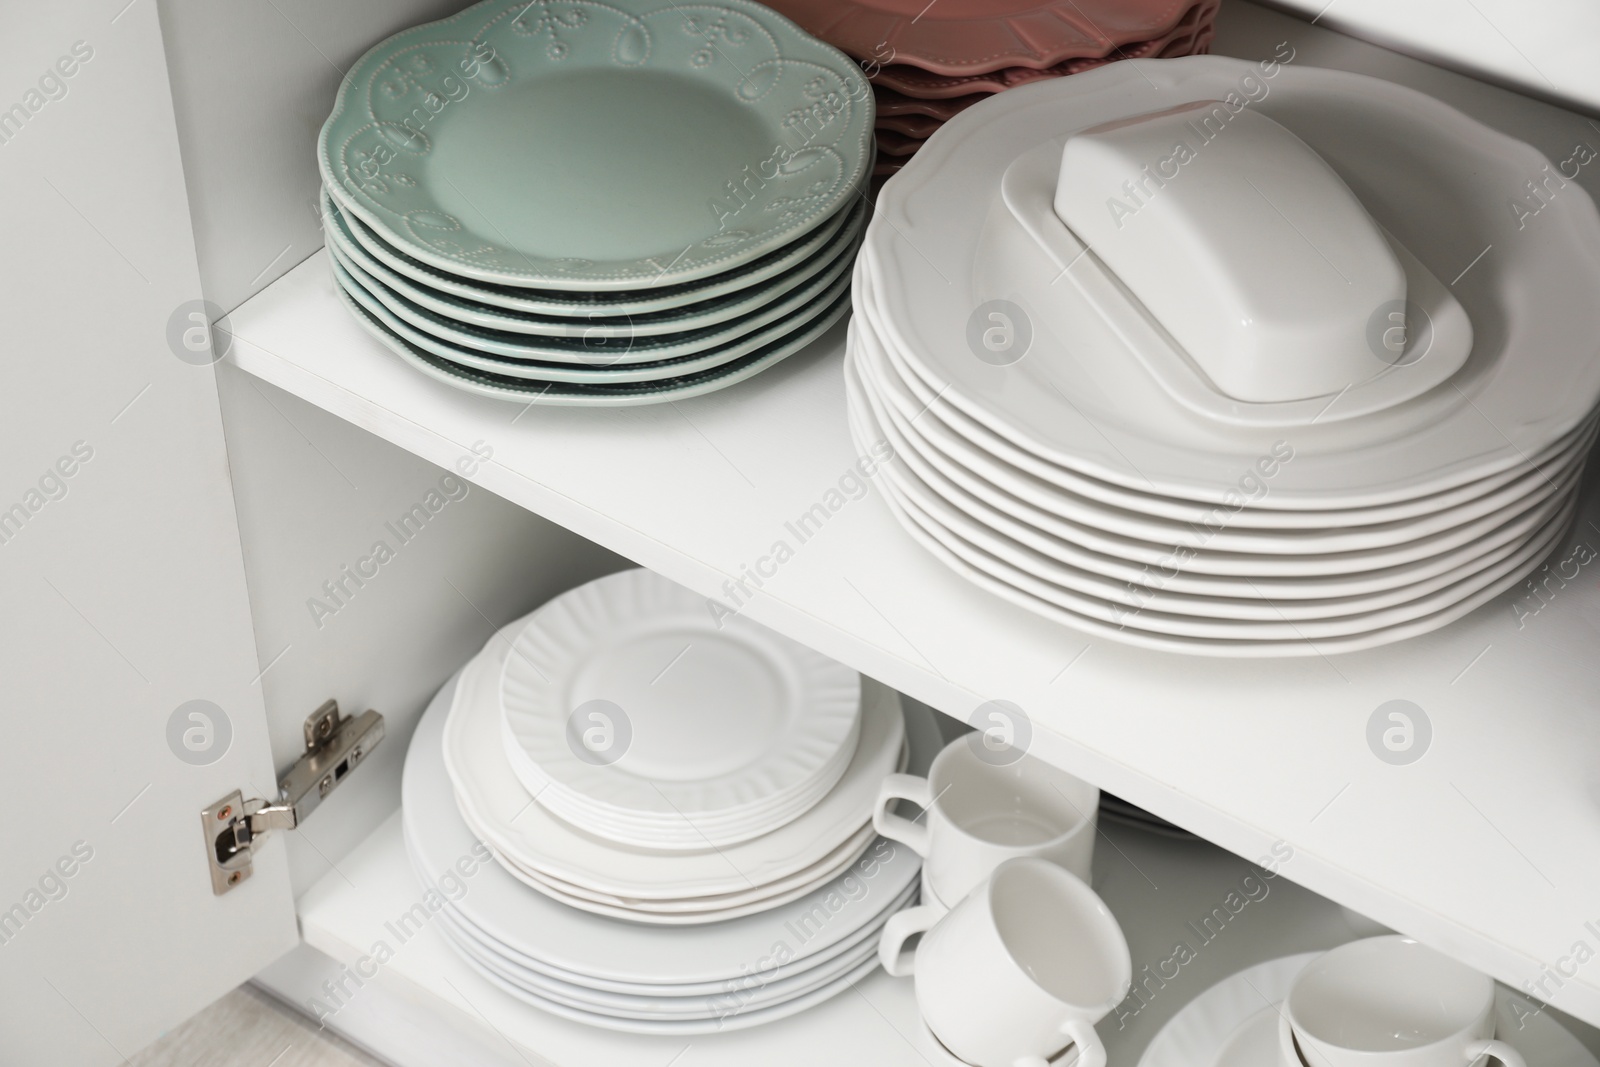 Photo of Clean plates, butter dish and cups on shelves in cabinet indoors